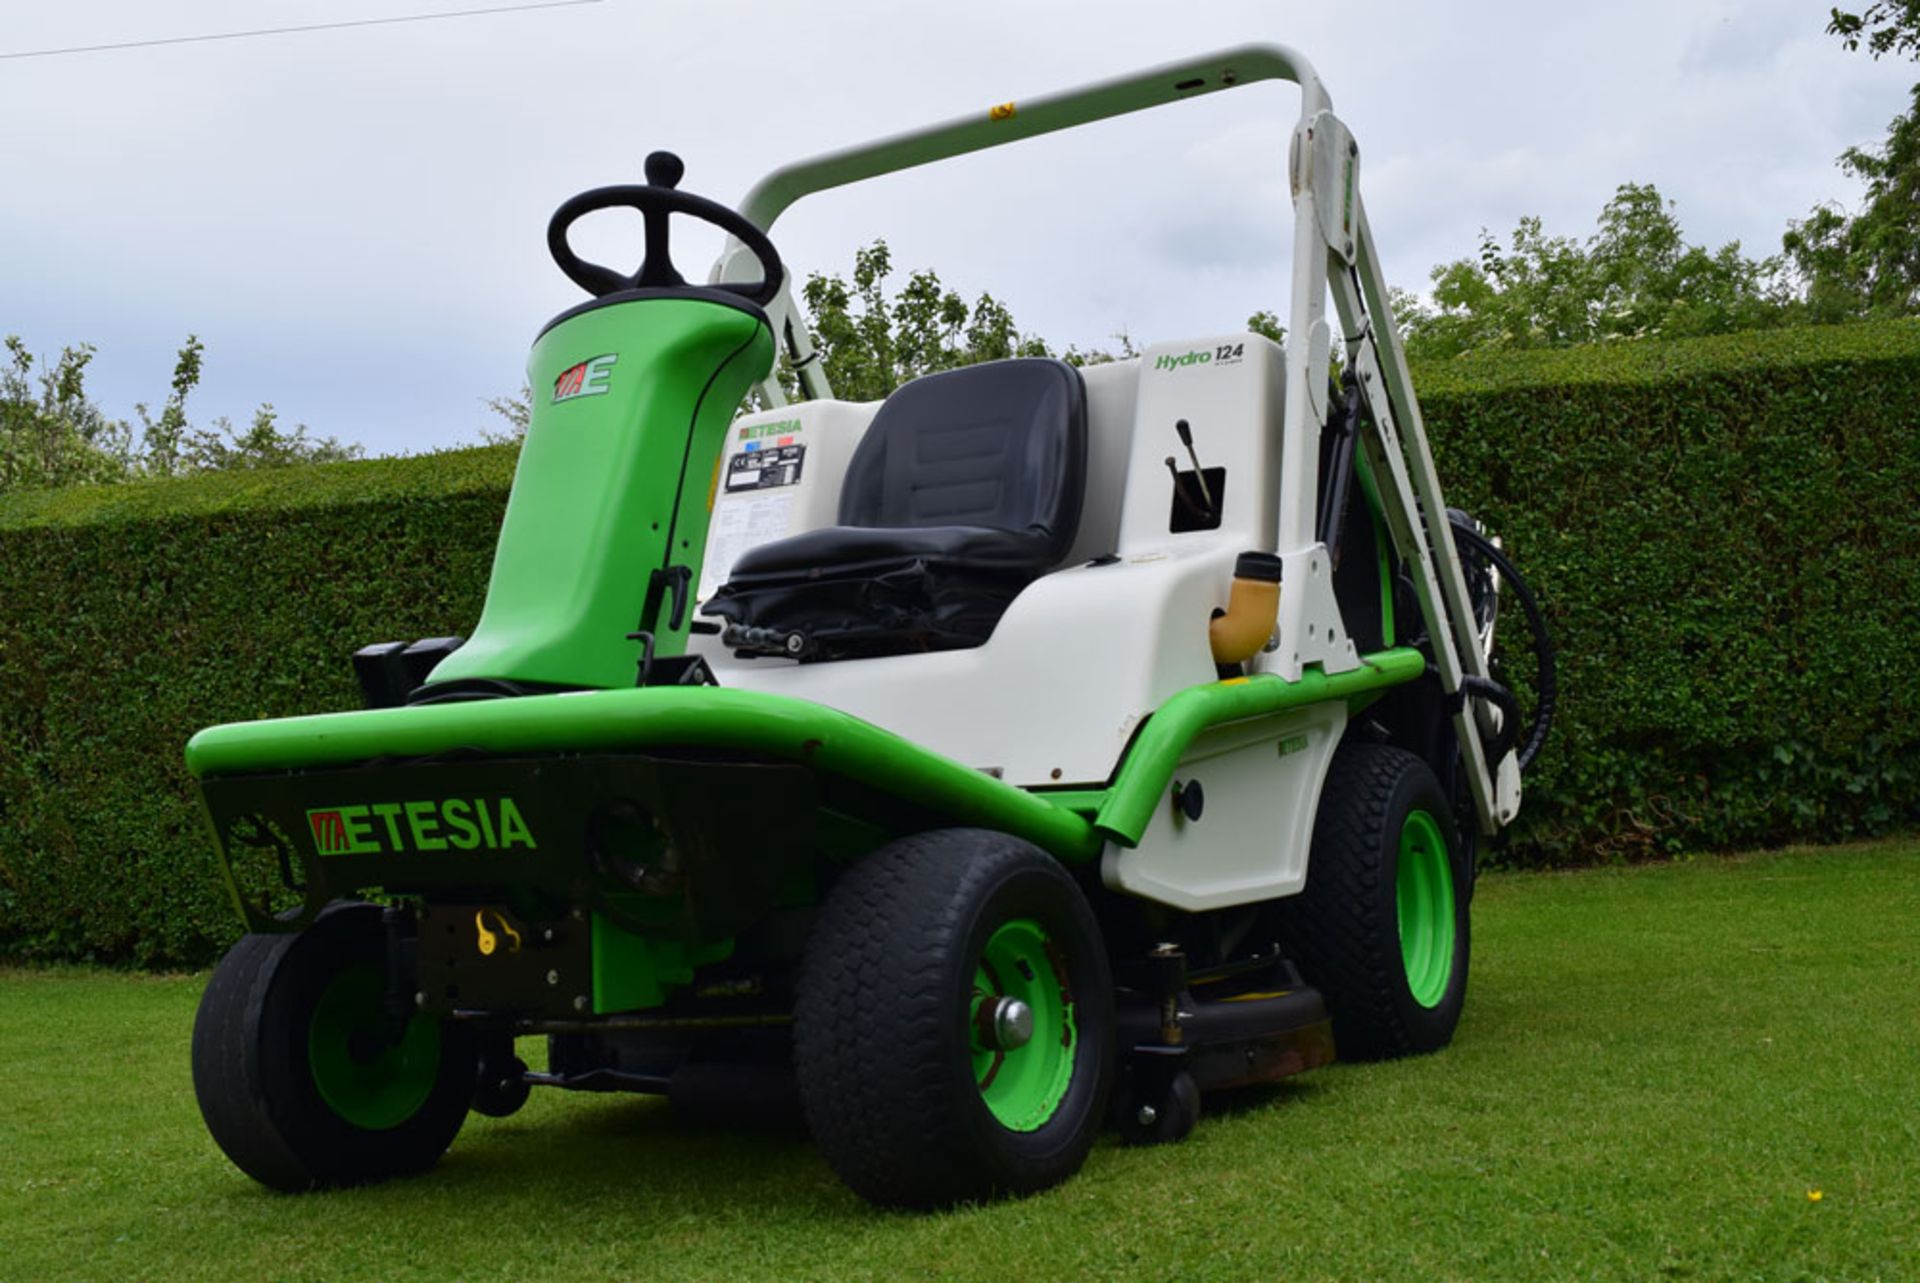 Etesia Hydro 124DS Ride On Rotary Mower - Image 5 of 15